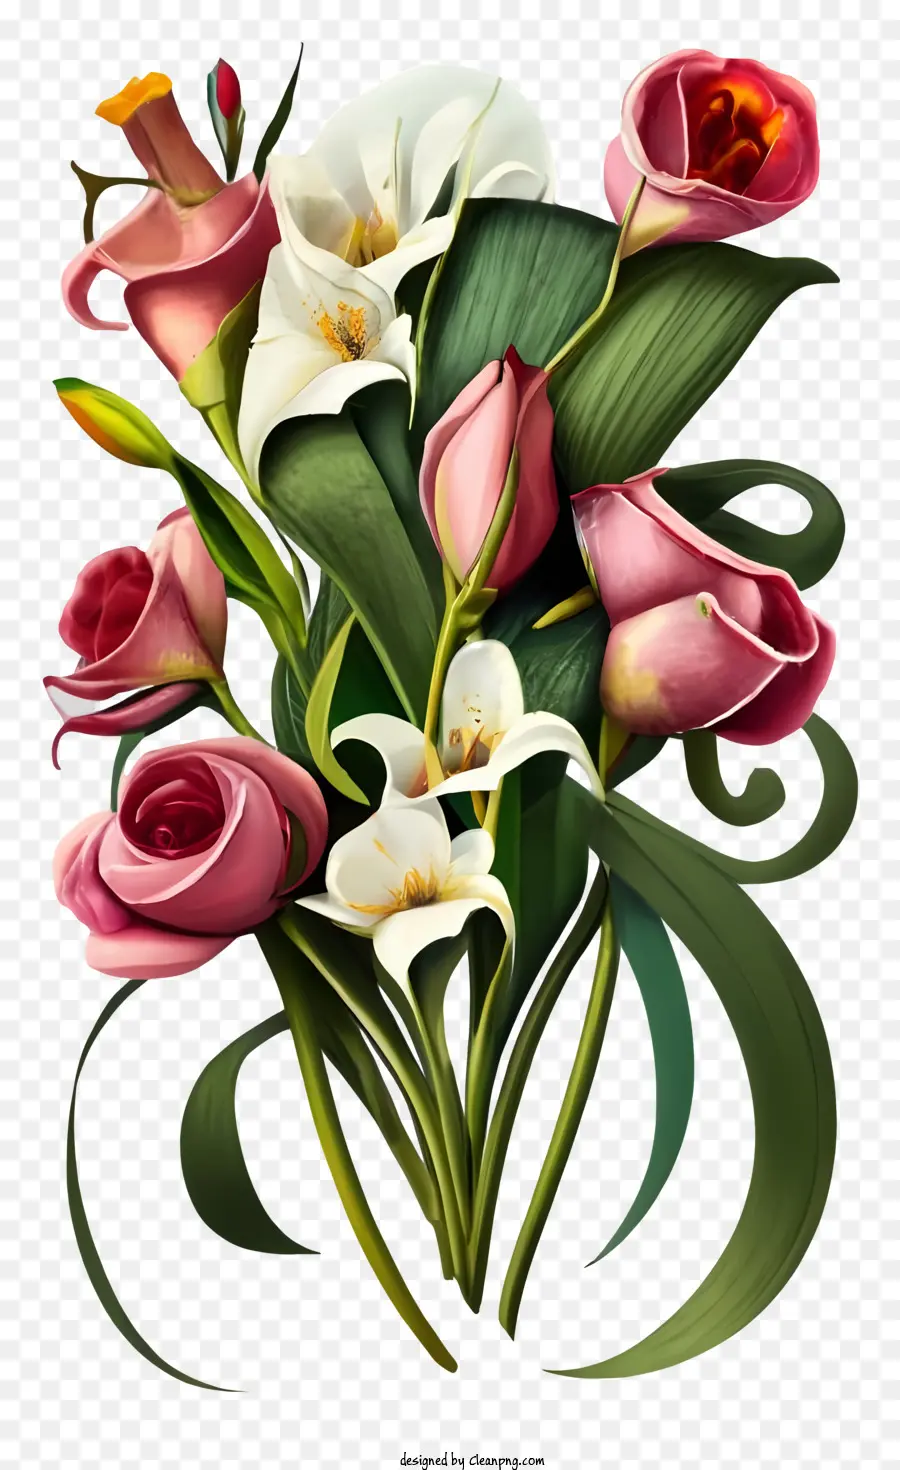 bouquet of roses and lilies pink and white flowers arranged in a vase realistic style painting vivid and lifelike colors